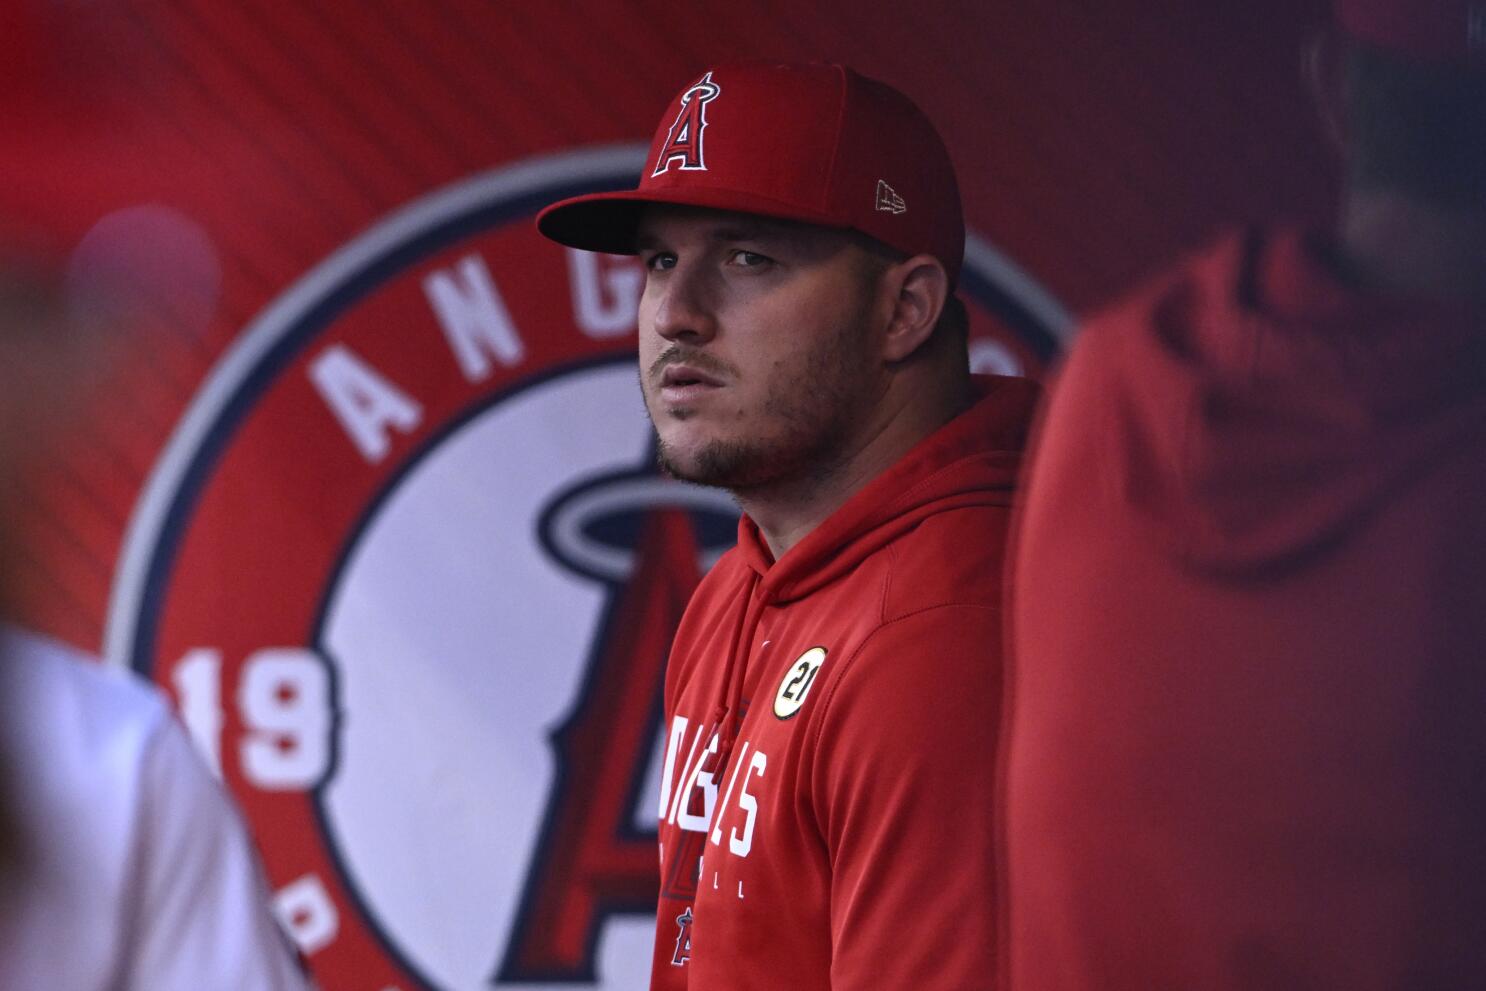 Angels' Mike Trout honors late brother-in-law with name on jersey - Los  Angeles Times